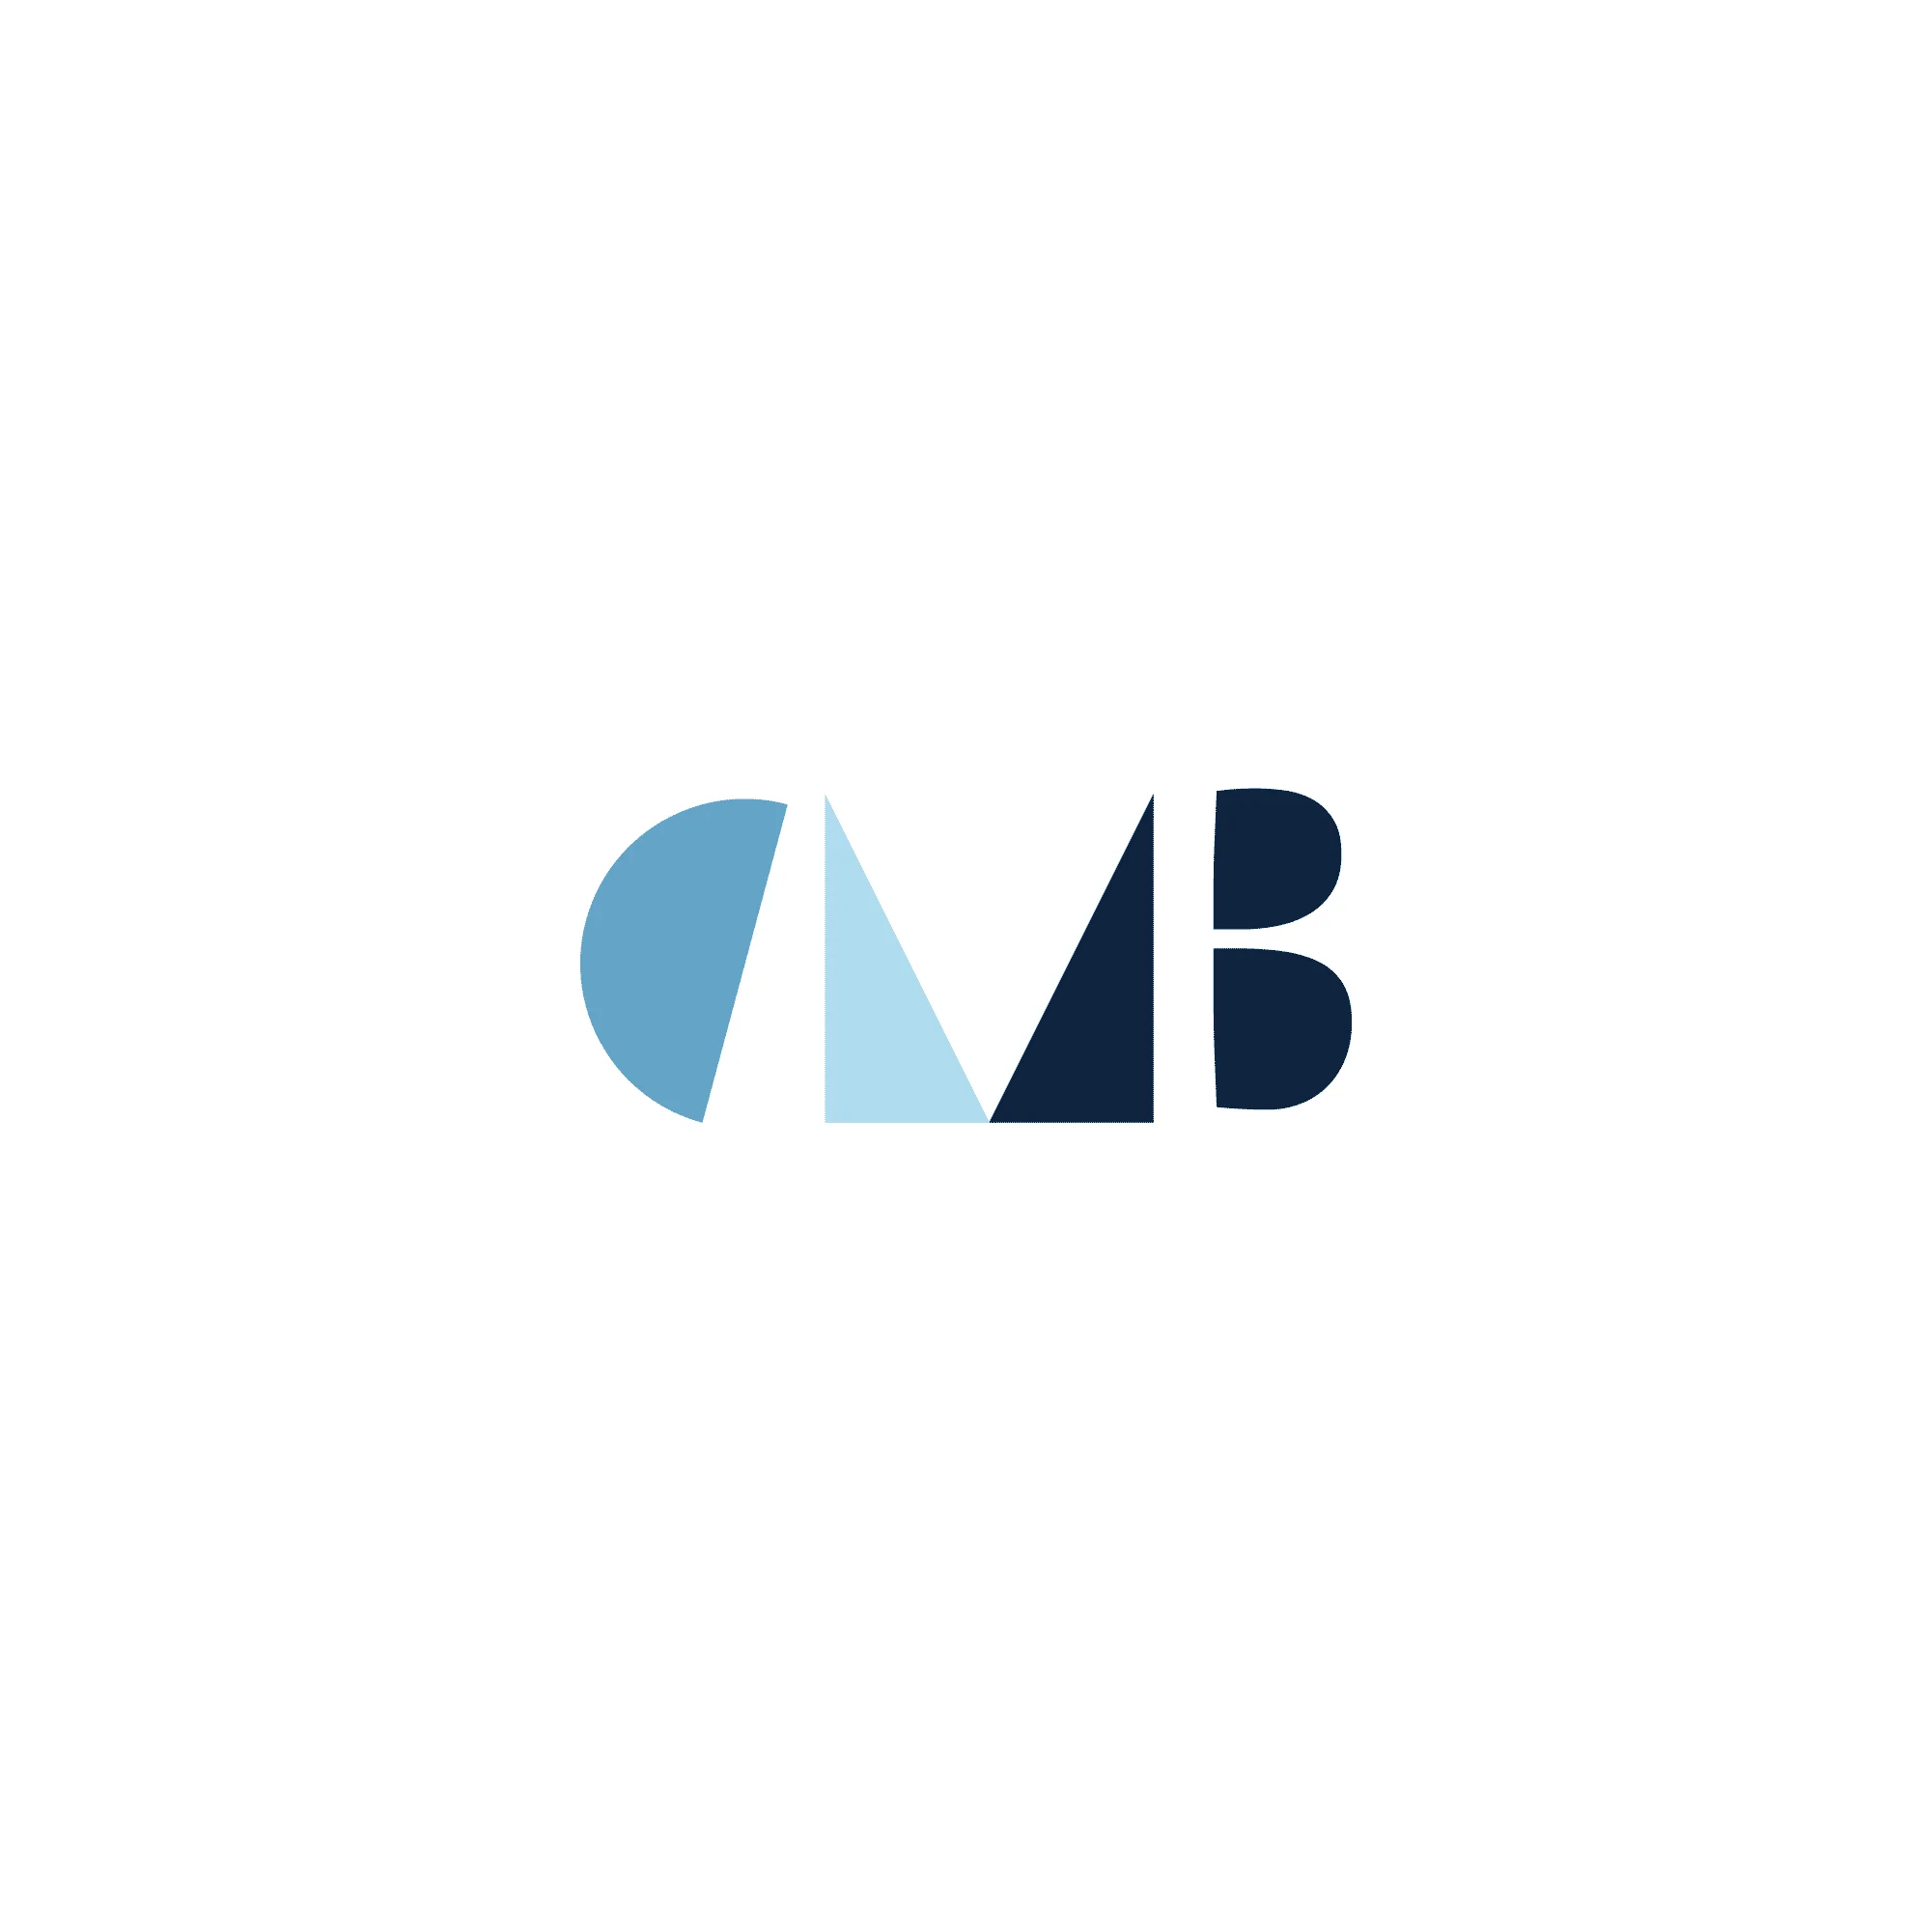 Minimalist, Fancy and elegant logo design, with sharp lettering in different shades of blue